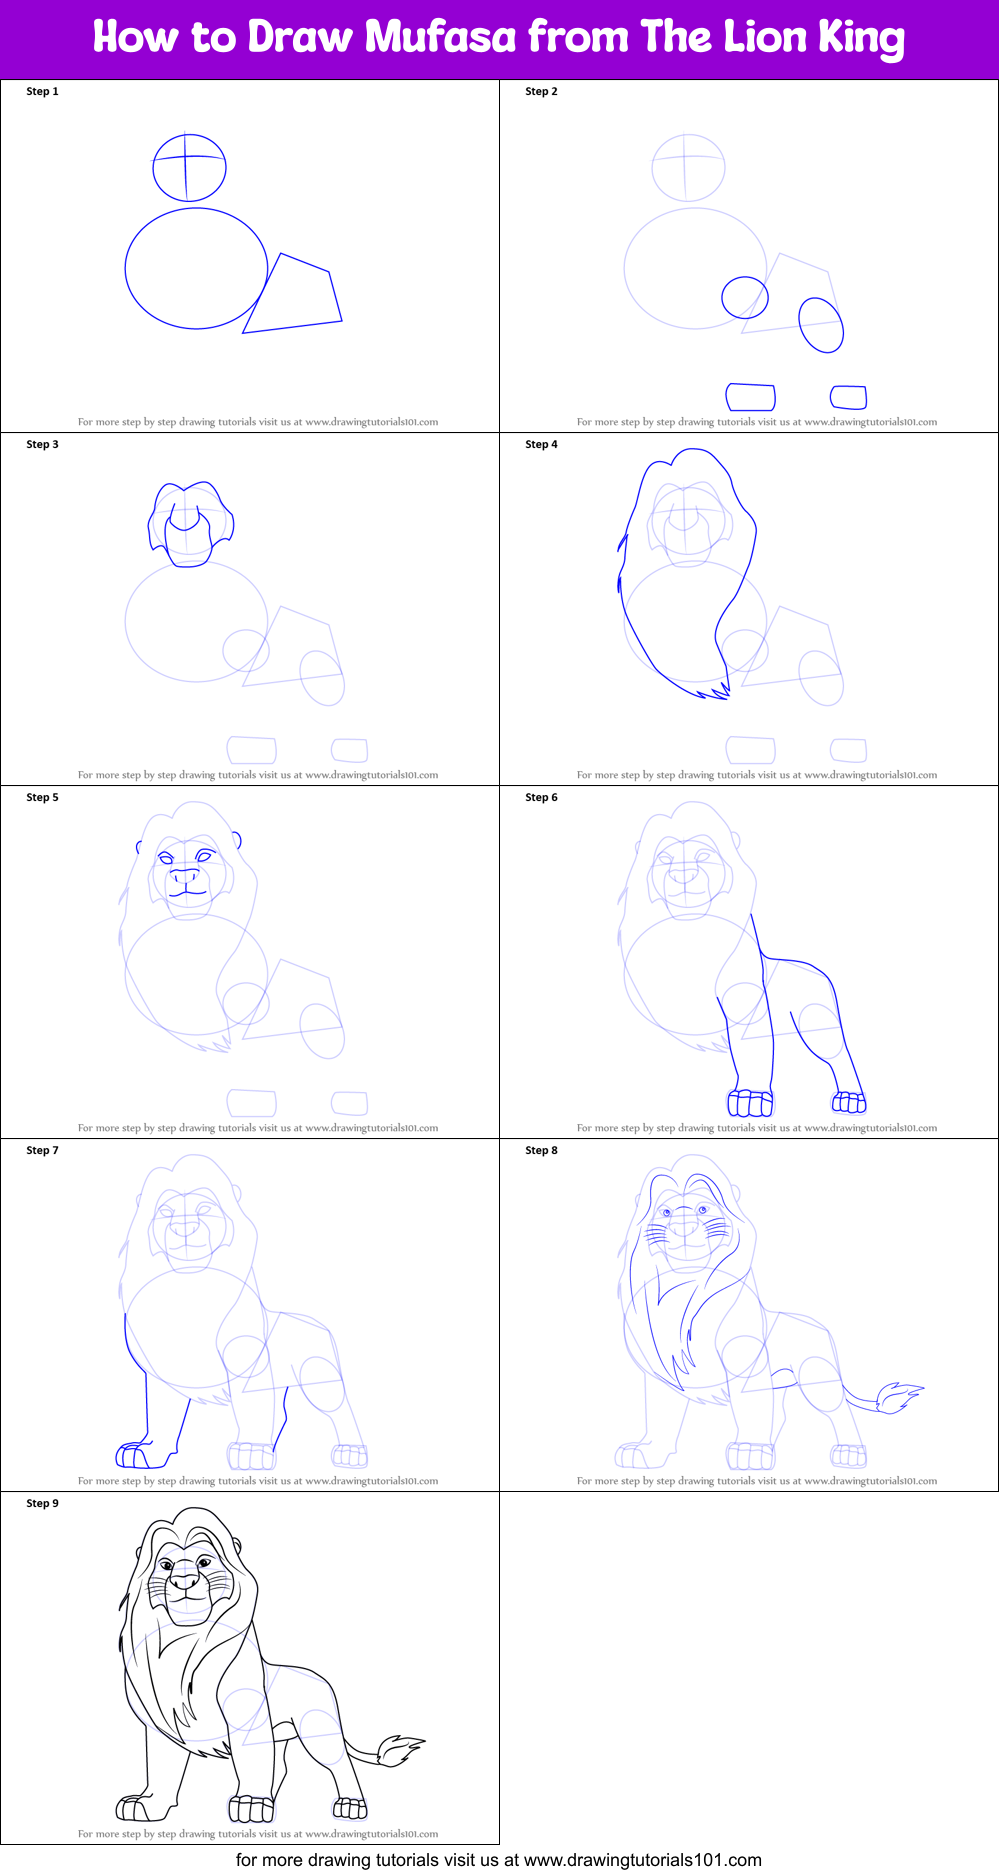 How to Draw Mufasa from The Lion King printable step by step drawing